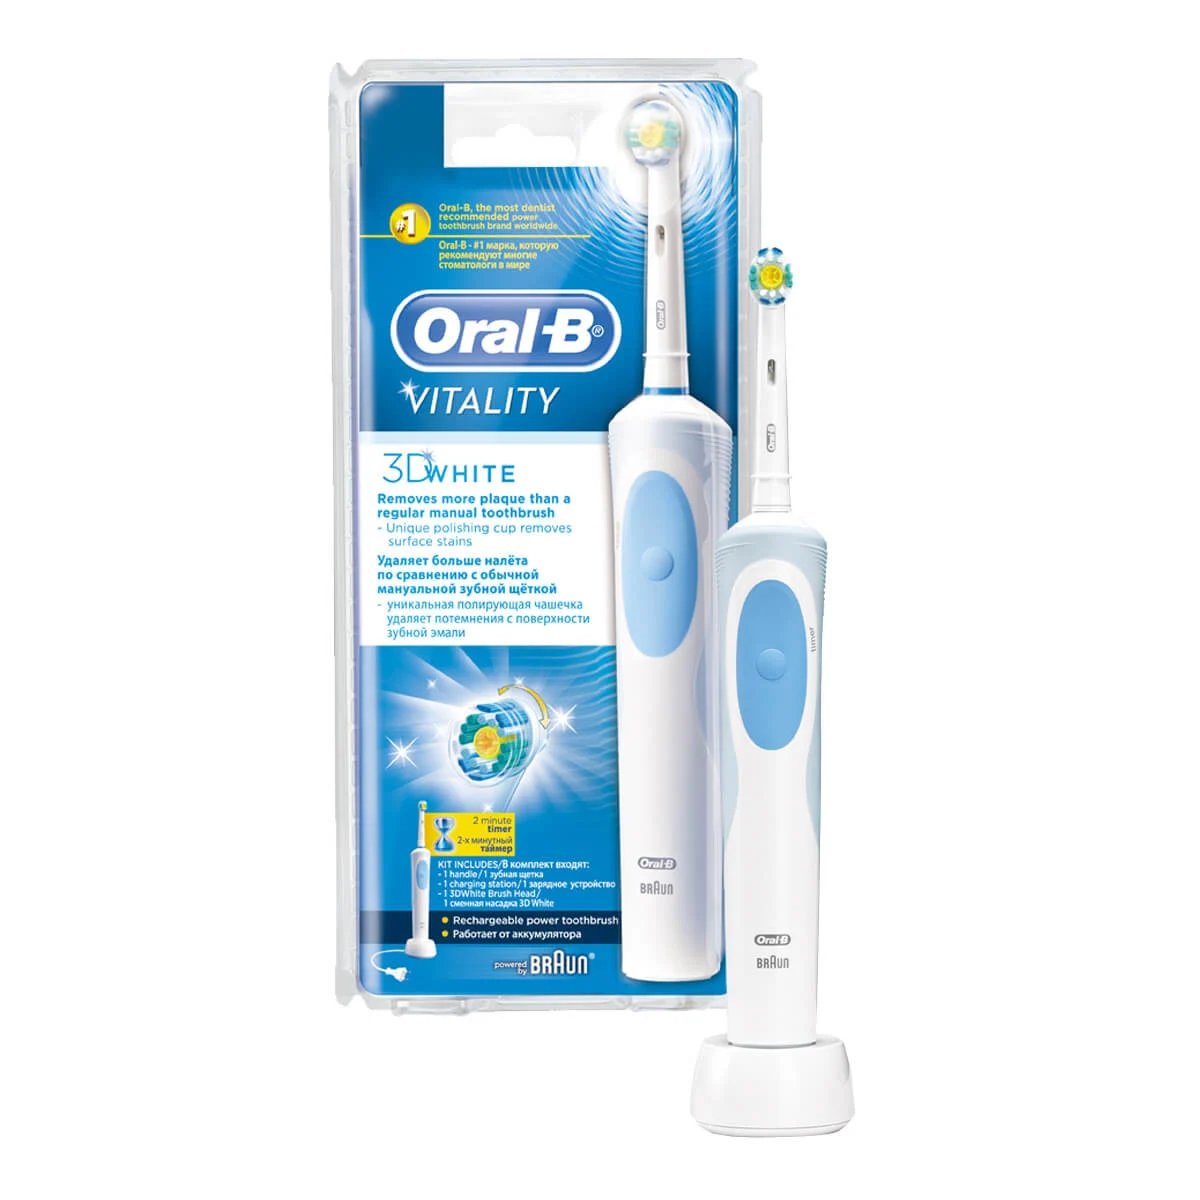 Oral-B Vitality 3D White electric toothbrush 